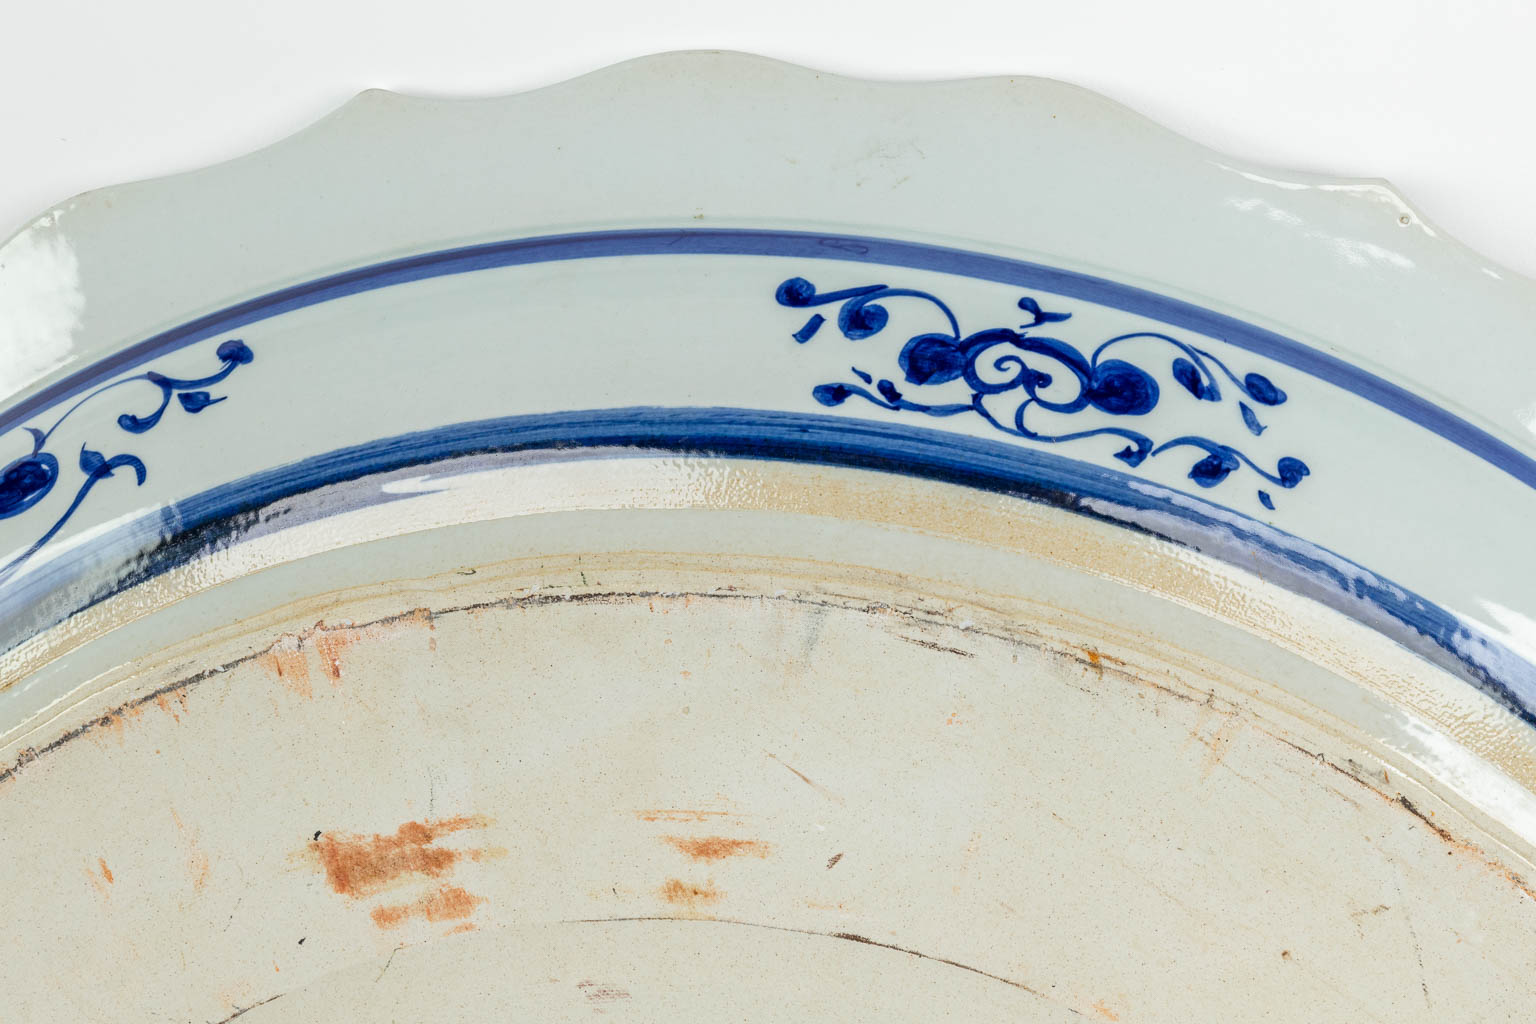 A huge Chinese plate, decorated with a blue-white decor with dragons. 20th century. 